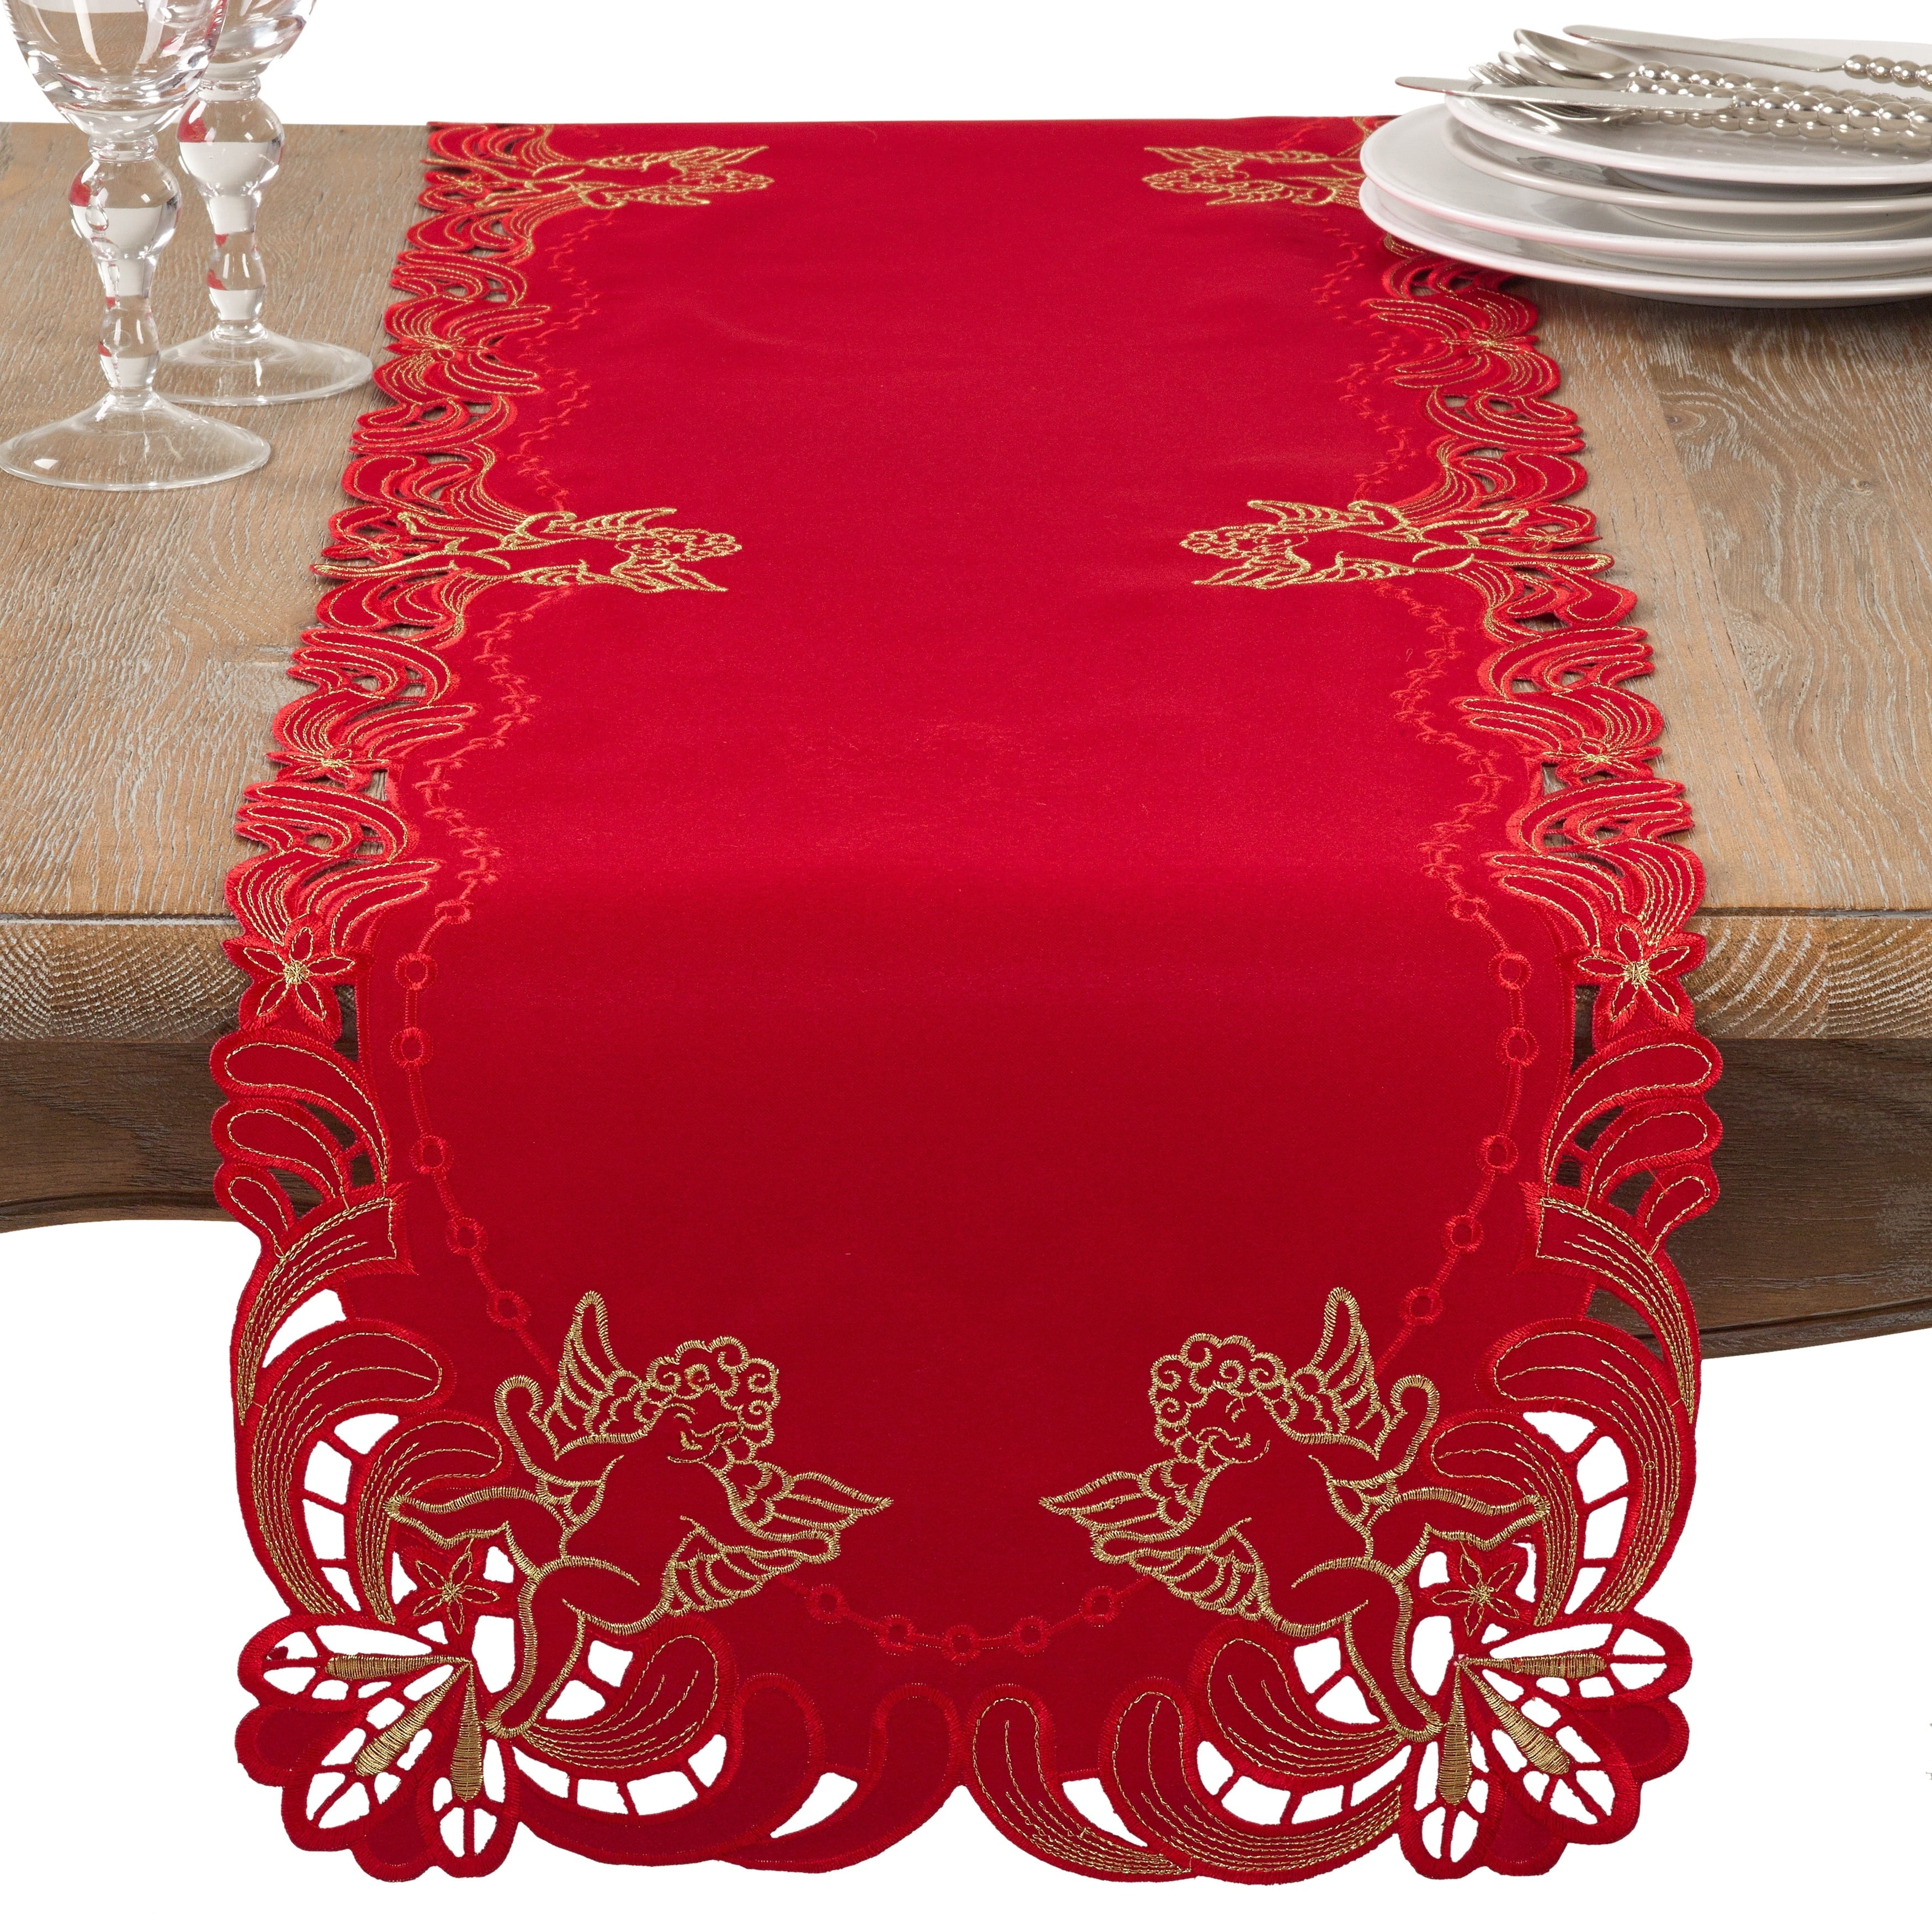 Runners & Placemats New Jacquard Rose Christmas Red Tablecloths Napkins 